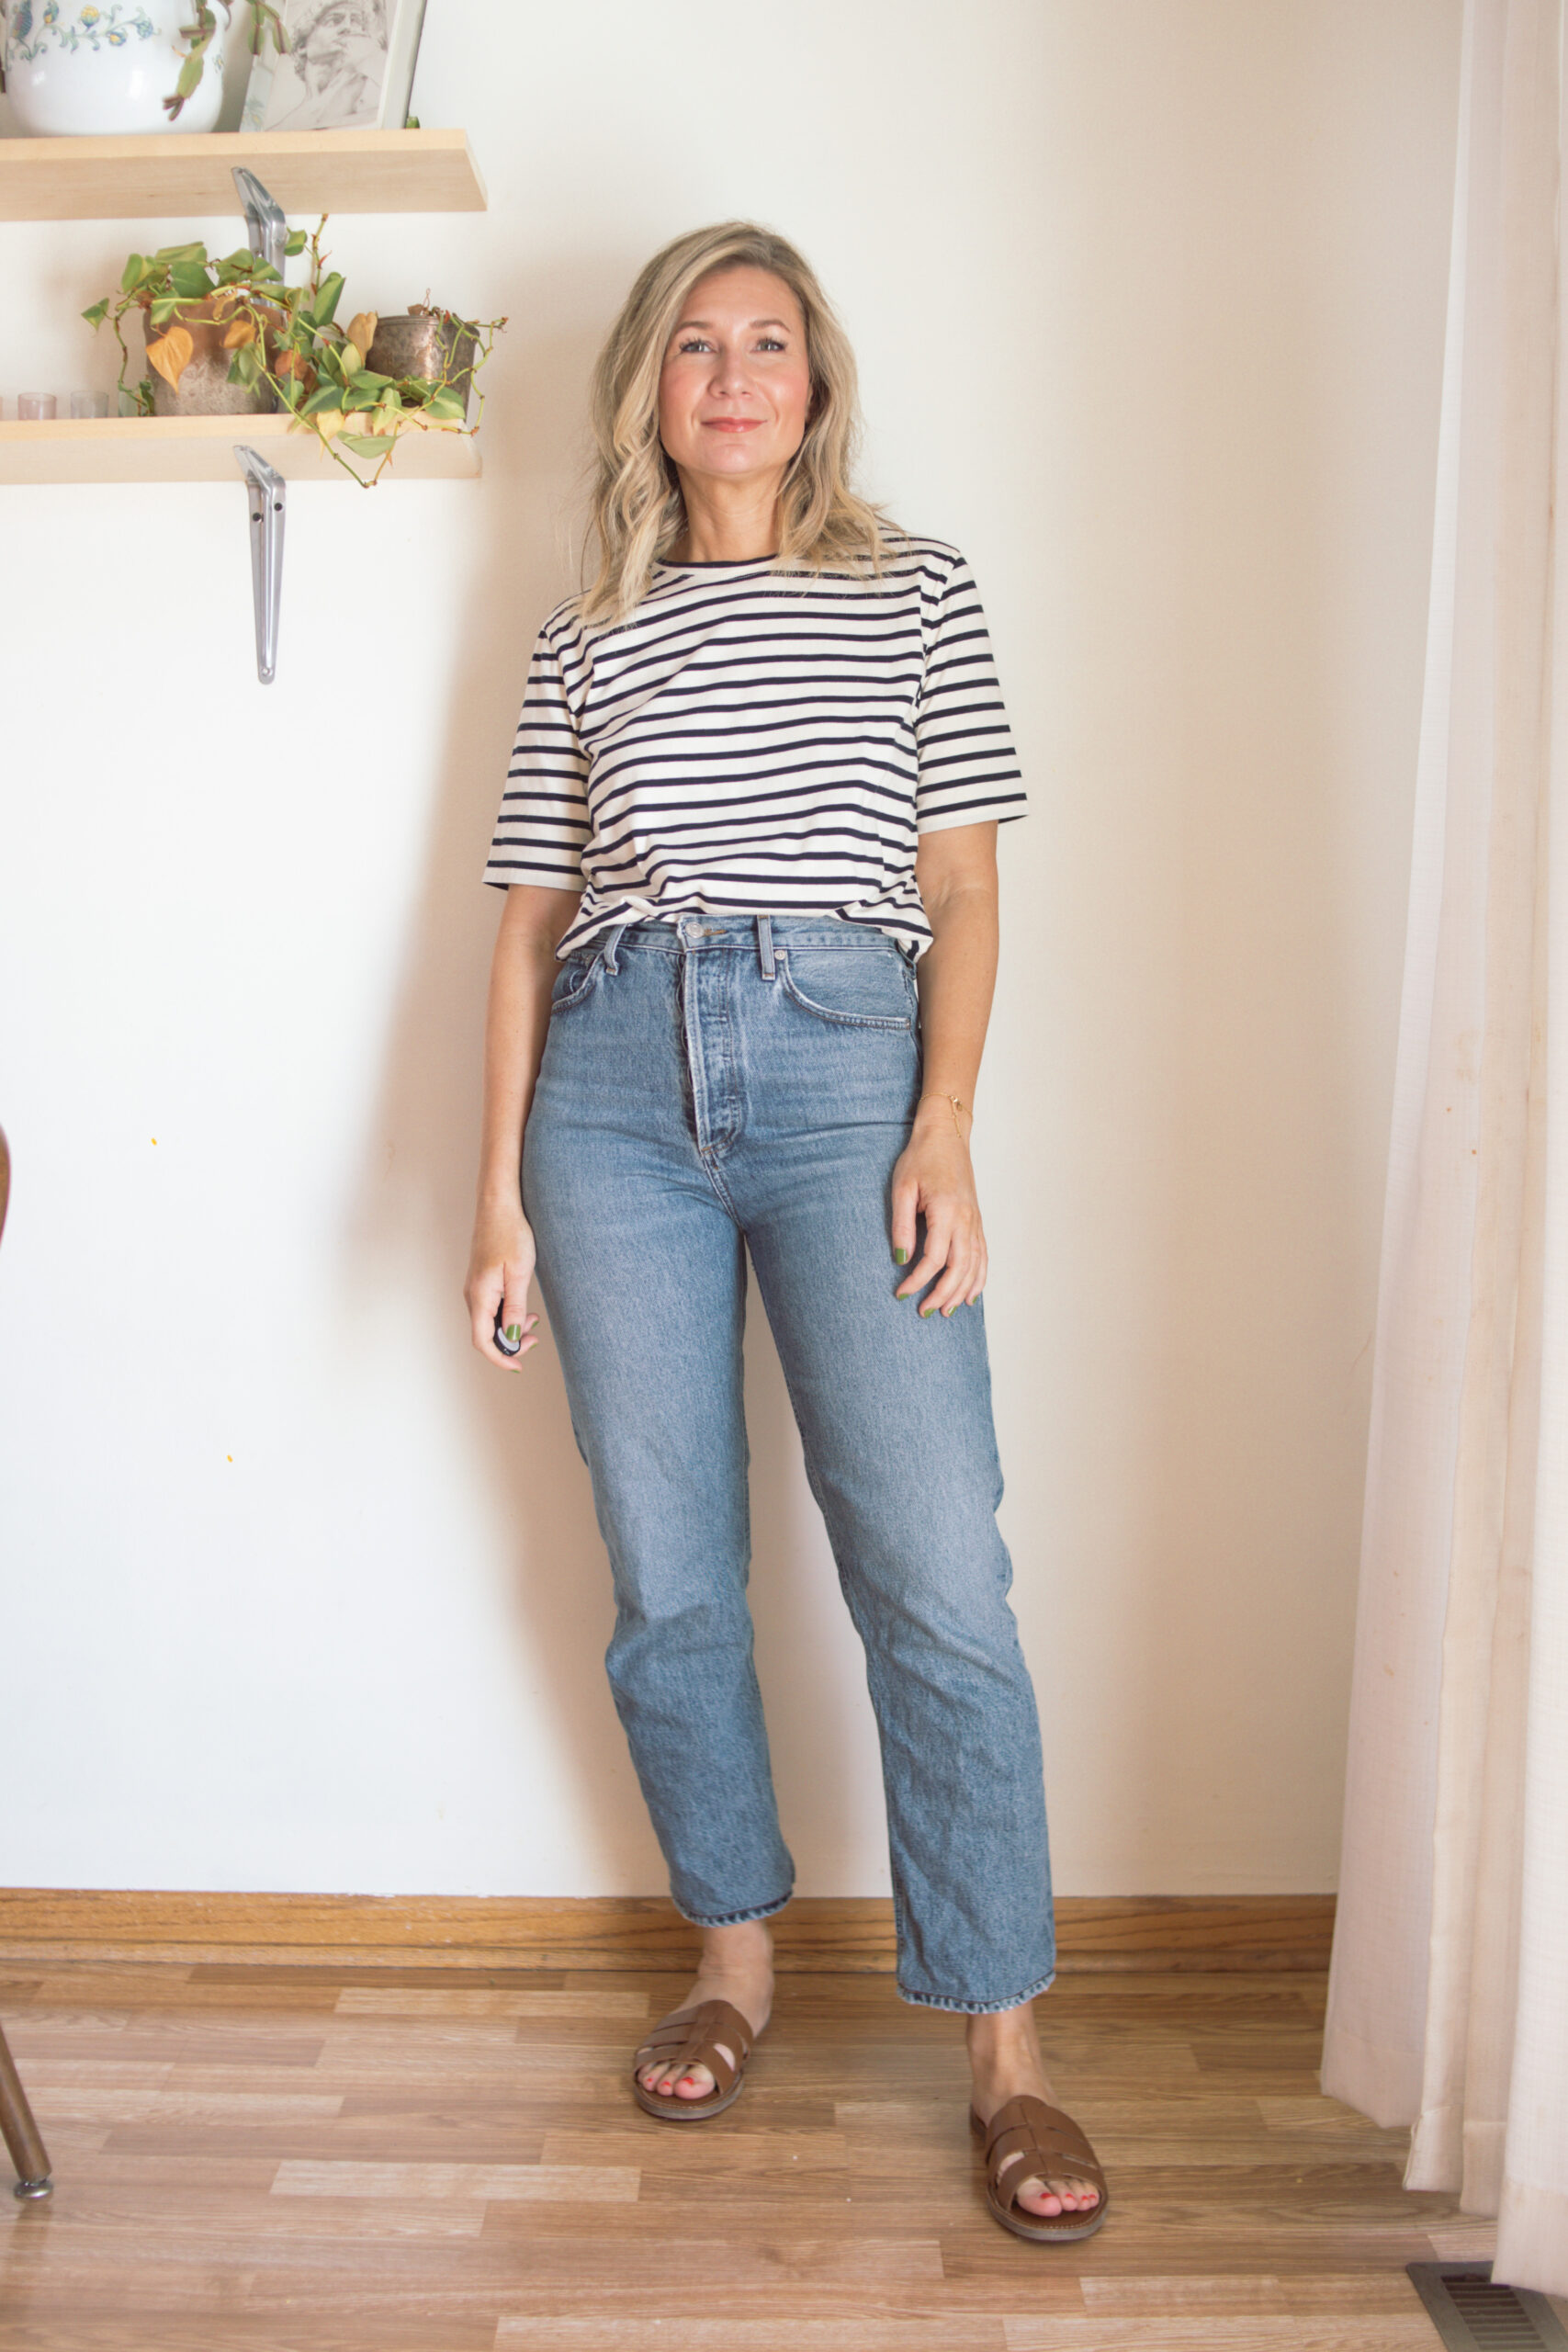 Karin Emily wears a pair of AGOLDE 90's pinch waist jeans with a striped tee and brown sandals for her AGOLDE denim guide